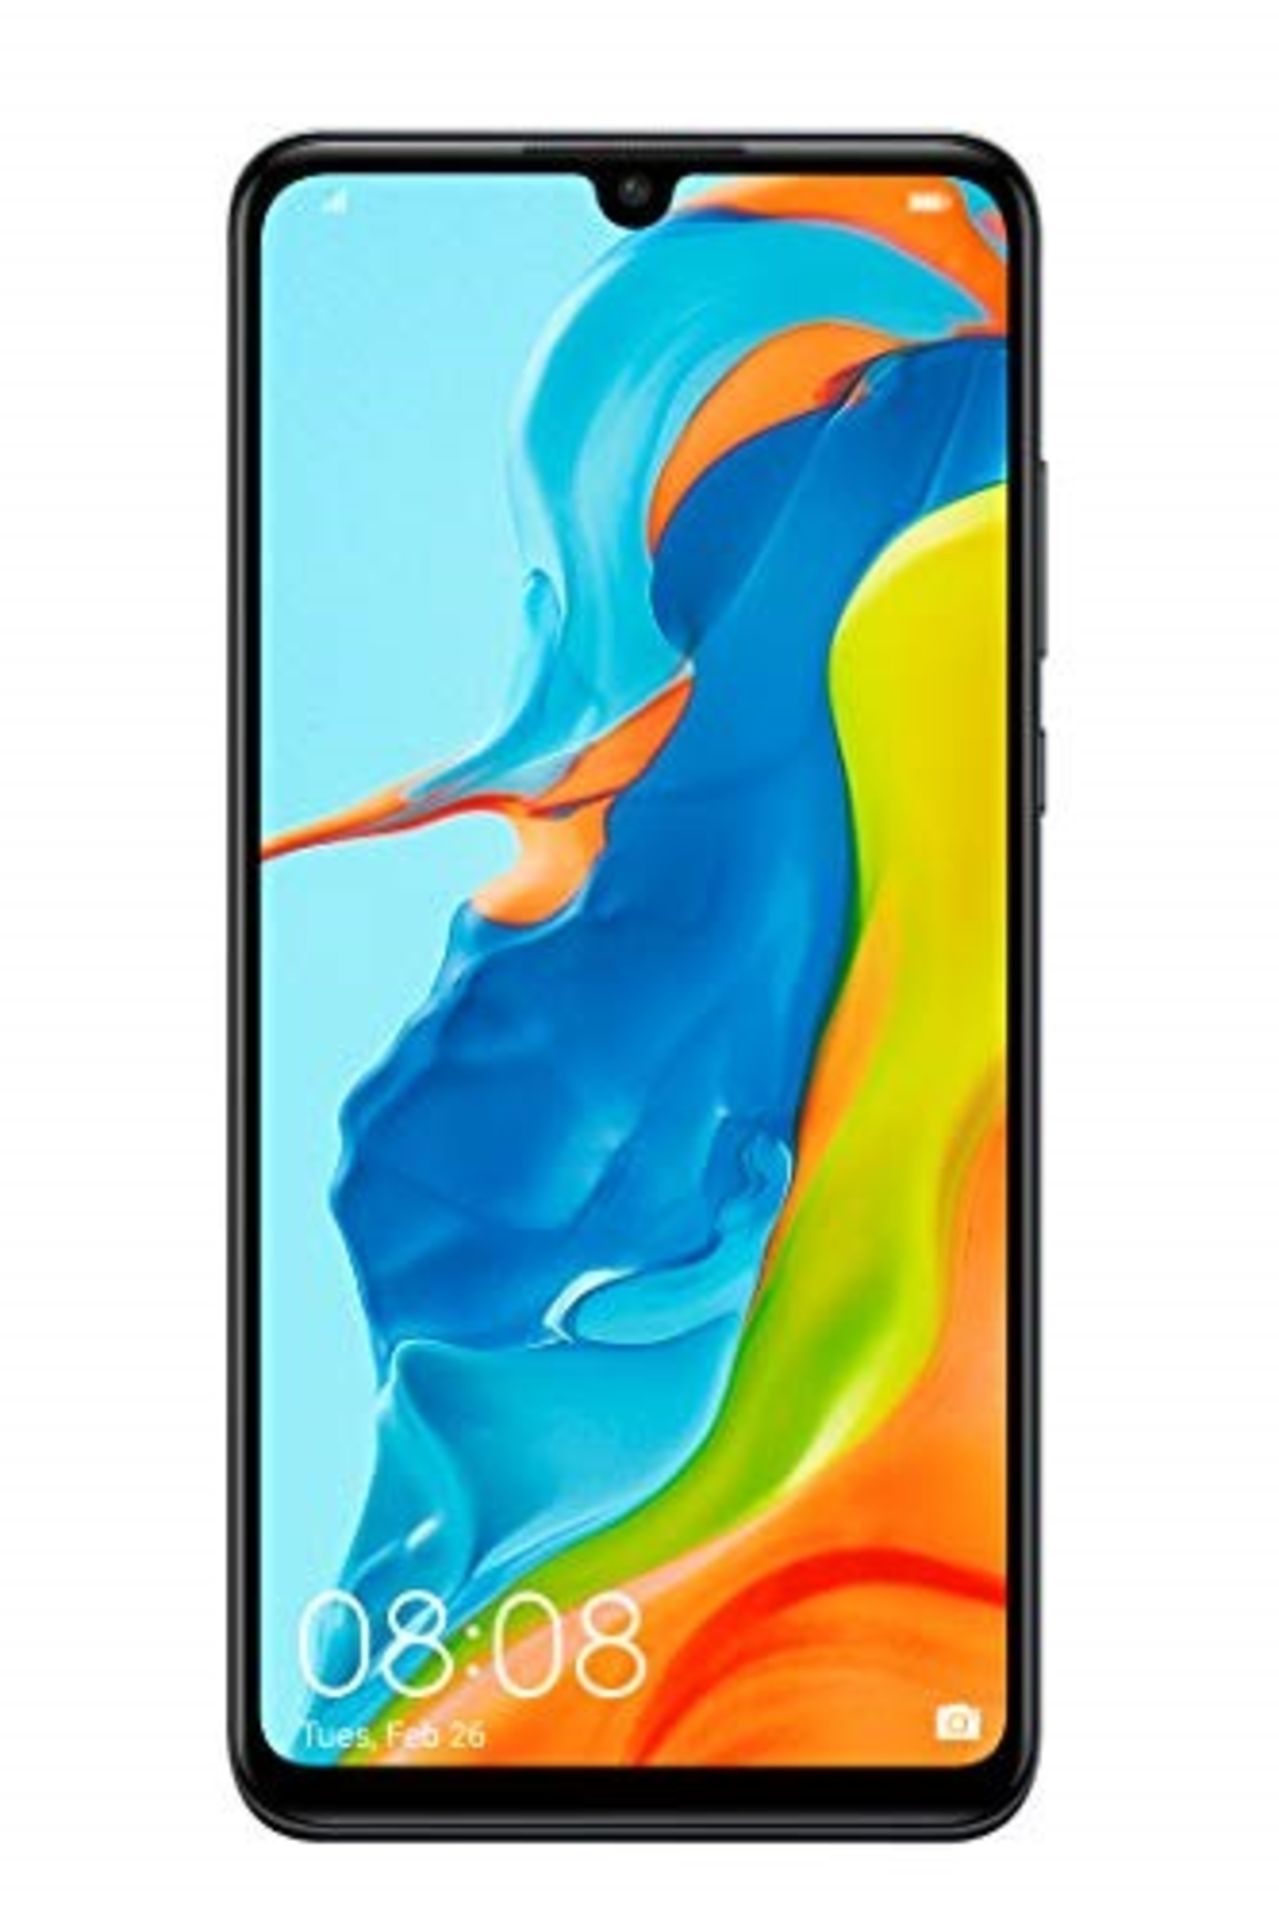 RRP £292.00 Huawei P30 Lite 128 GB 6.15 inch FHD Dewdrop Display Smartphone with 48MP AI Ultra-wid